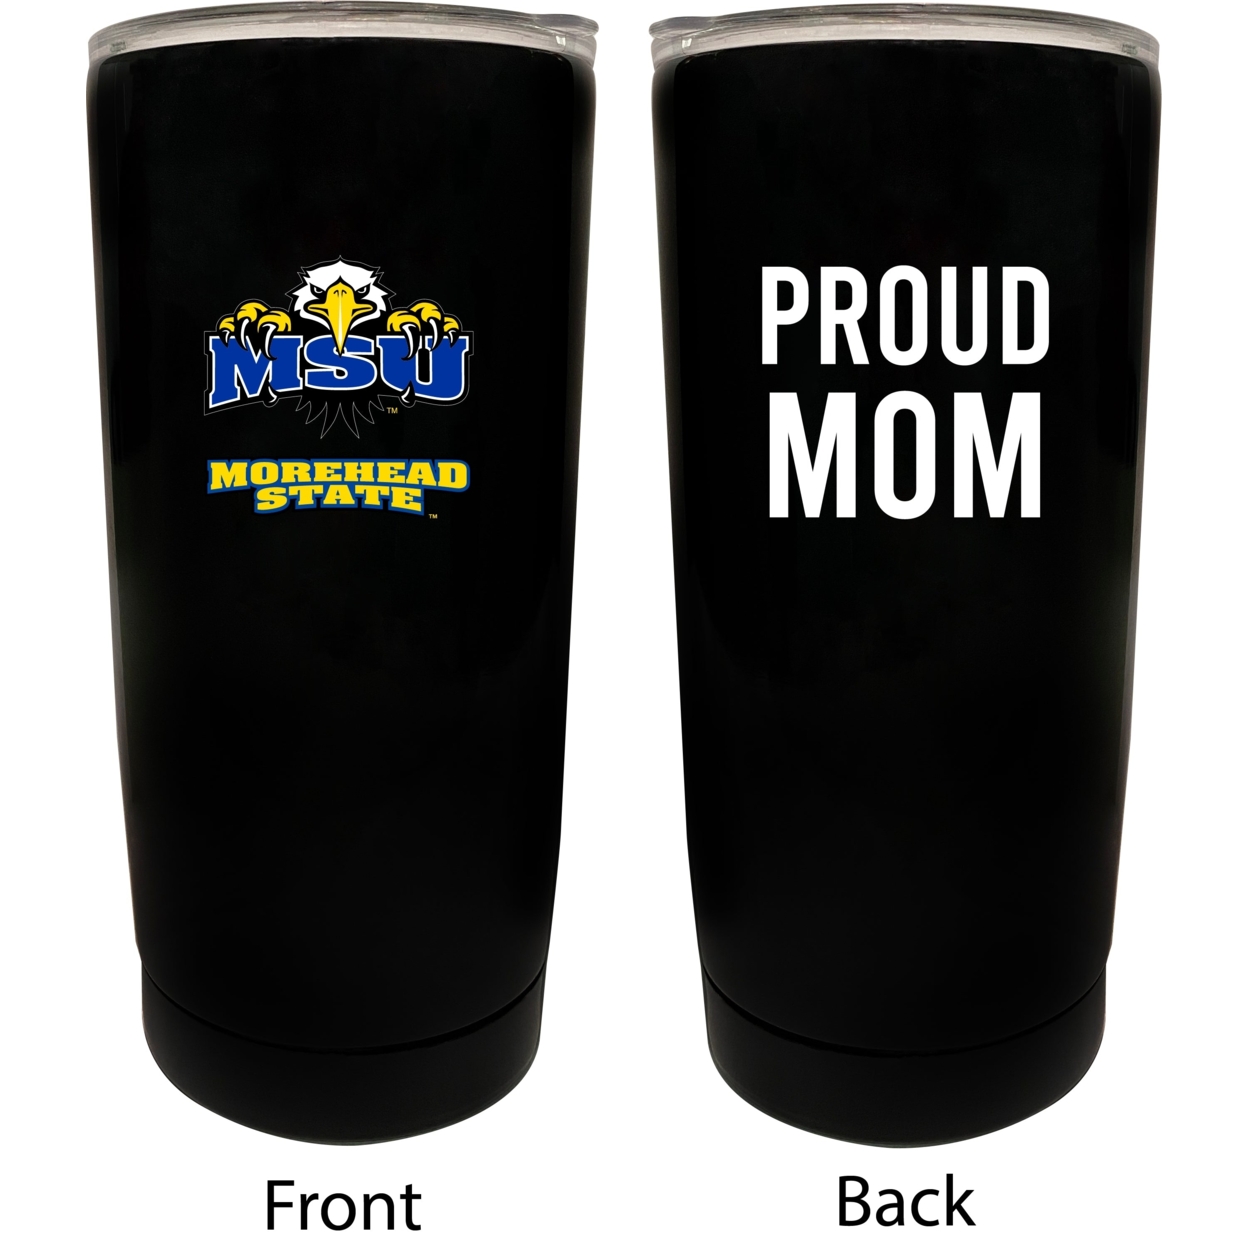 Morehead State University Proud Mom 16 Oz Insulated Stainless Steel Tumblers